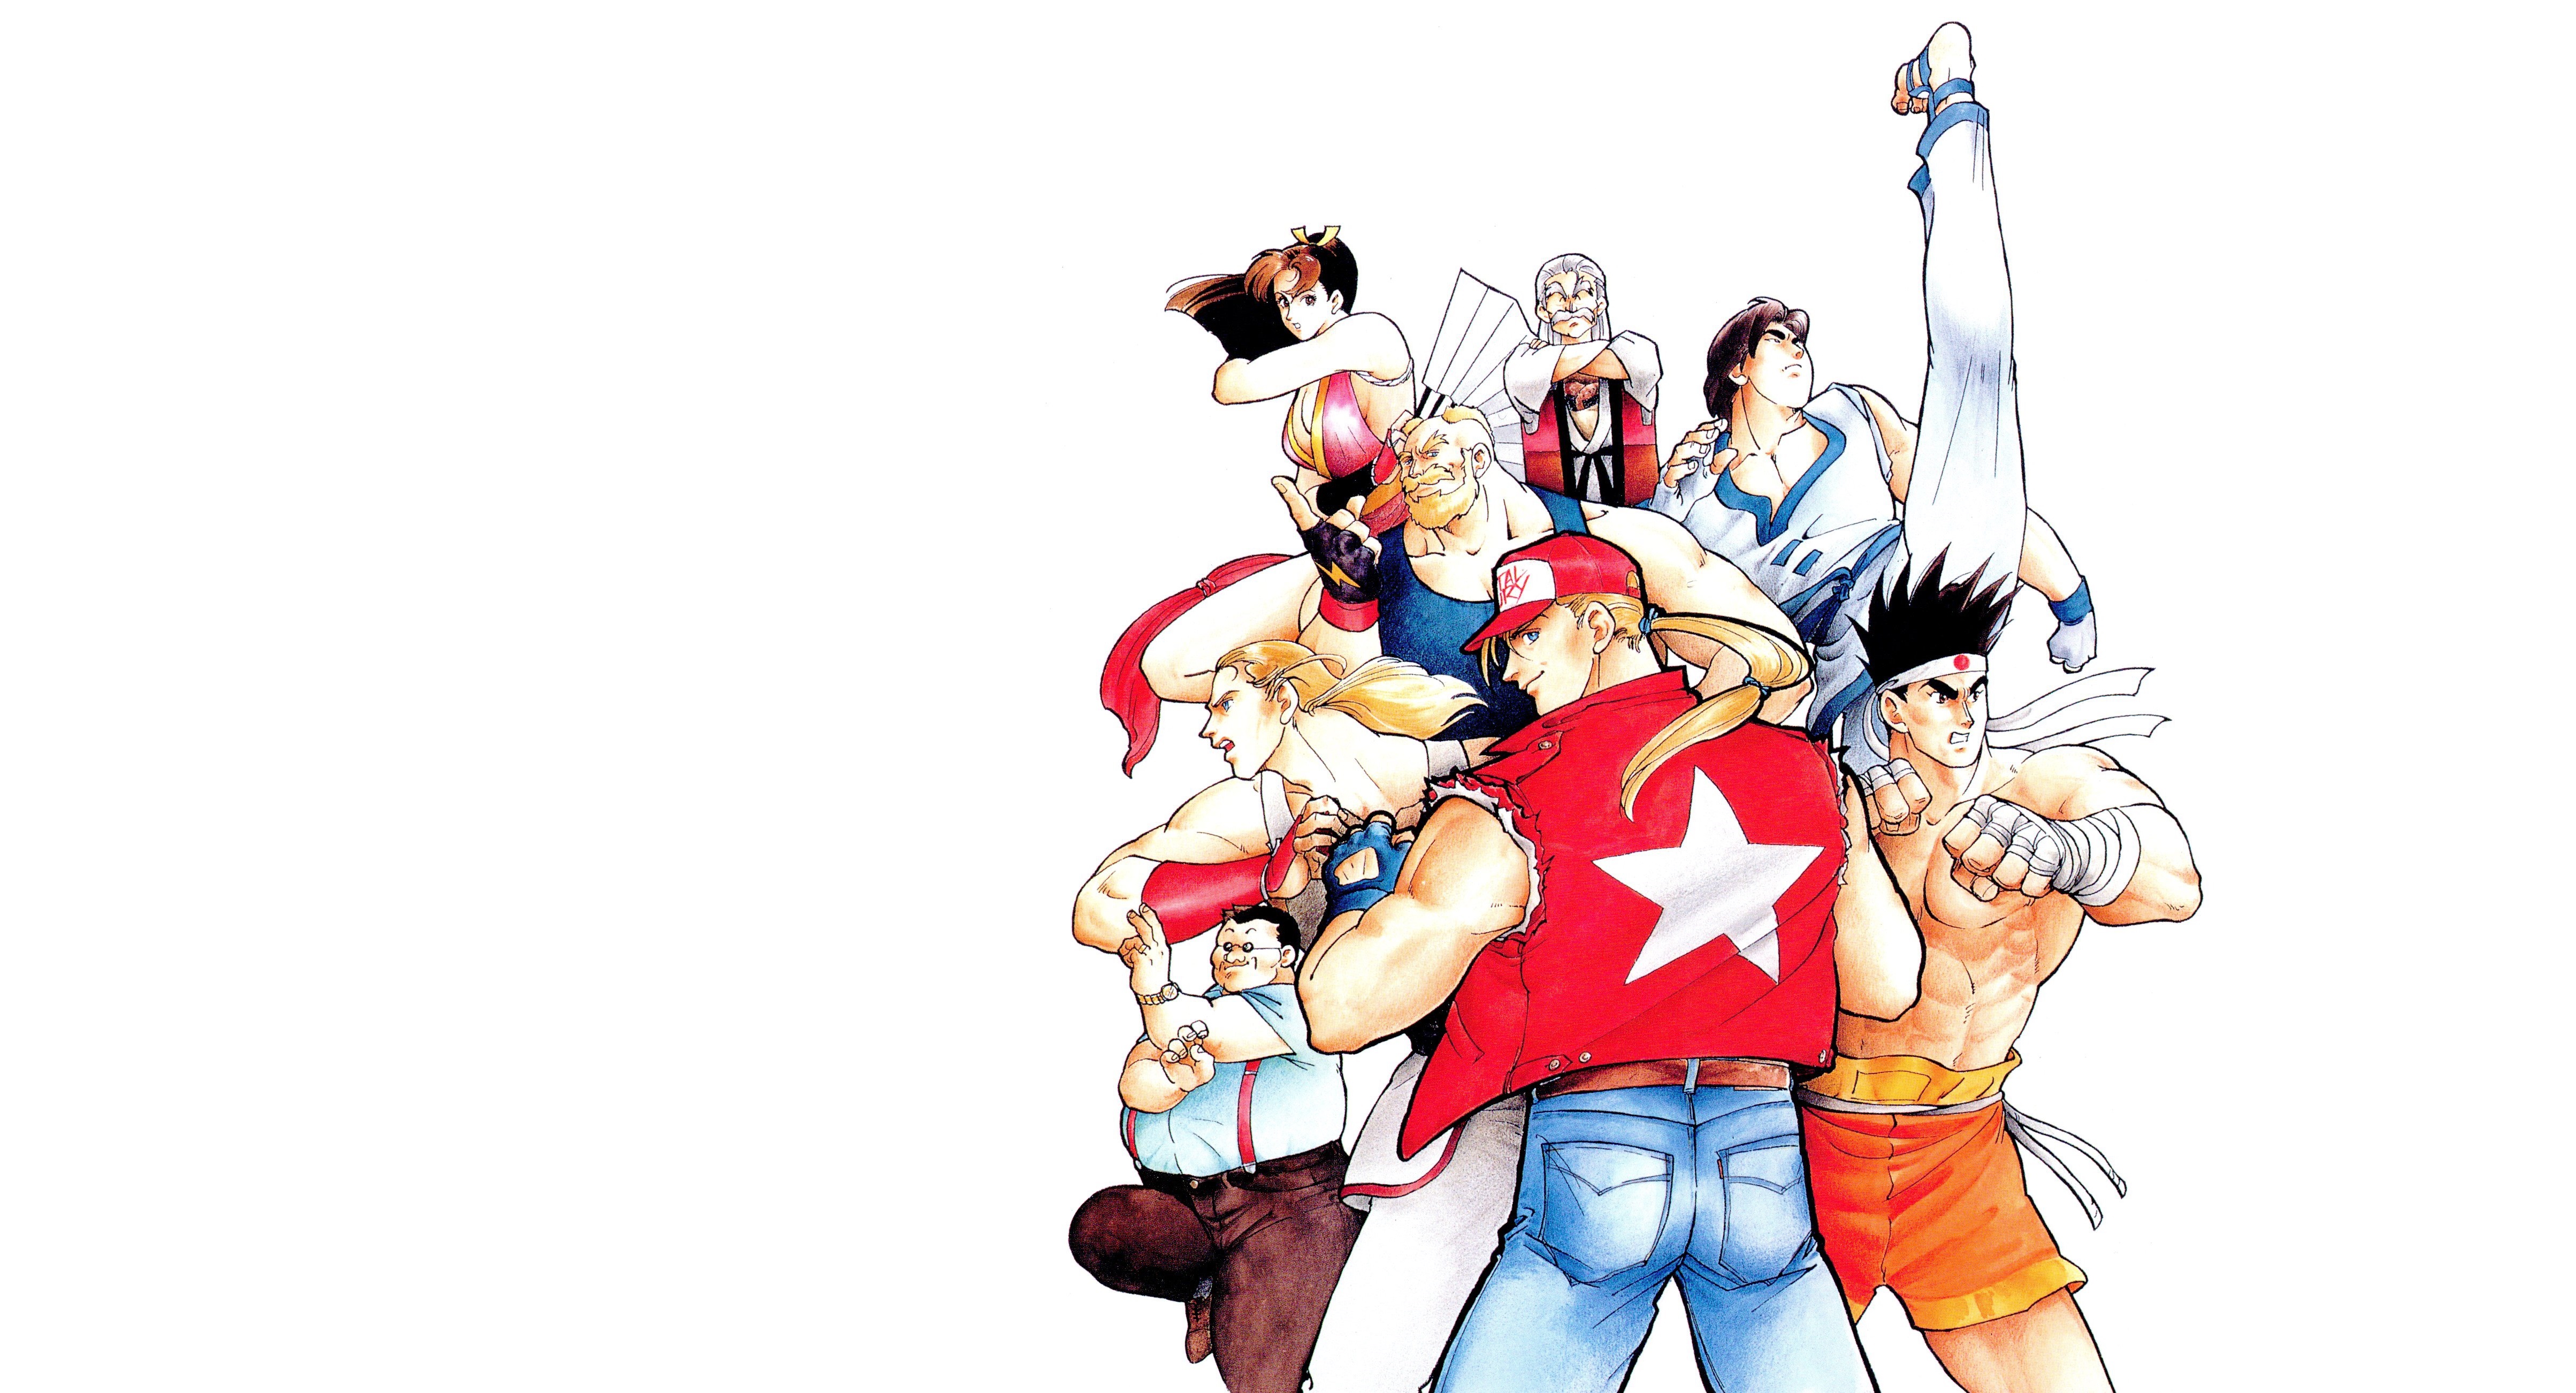 Fatal Fury 2 Images - LaunchBox Games Database